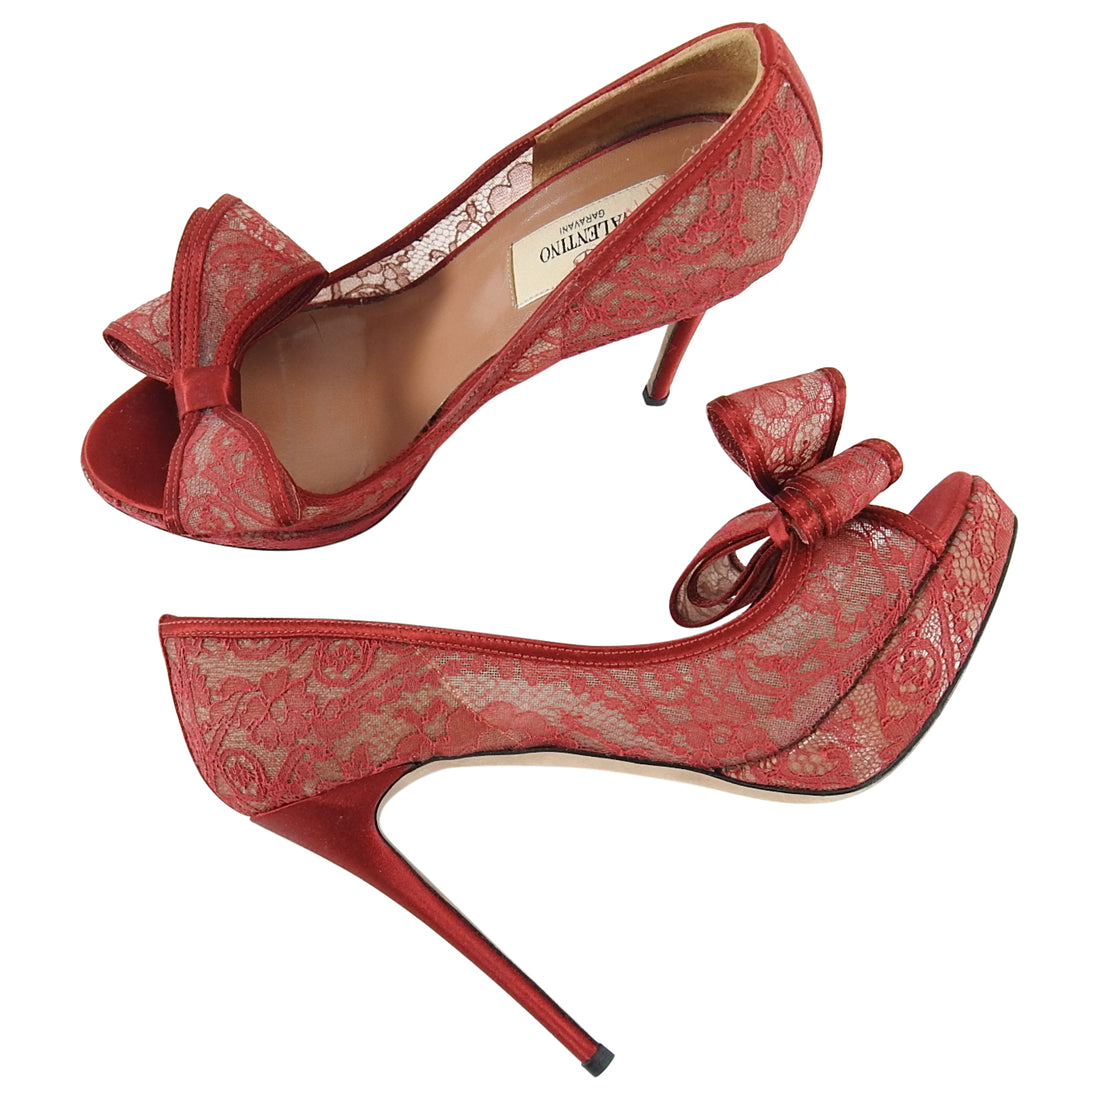 Valentino Red Lace Bow Satin Peep Toe Pumps - 36.5